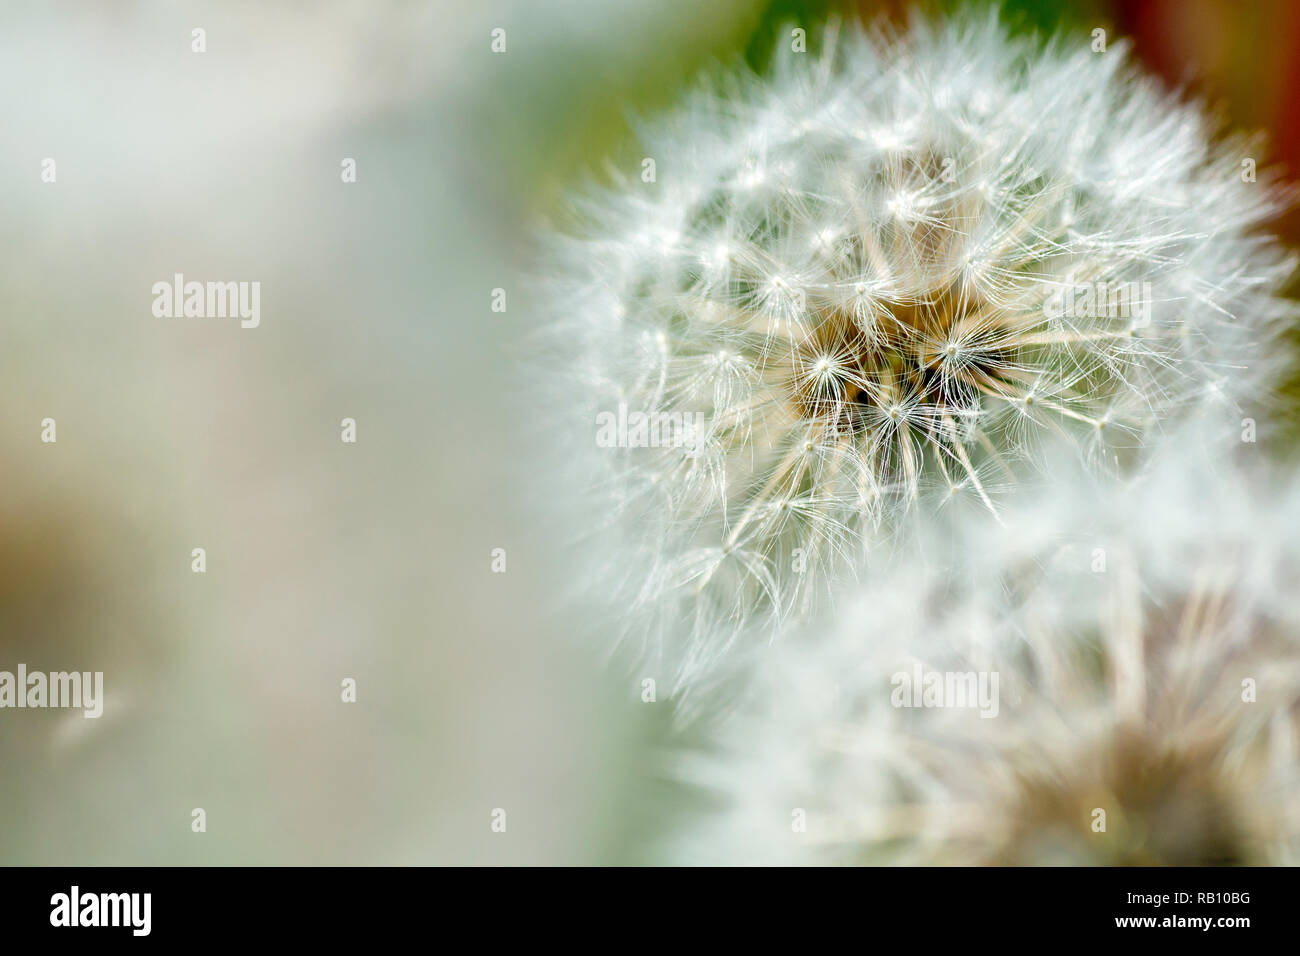 Dandelion seedhead (taraxacum officinale), close up of one plant out of many with low depth of field. Stock Photo